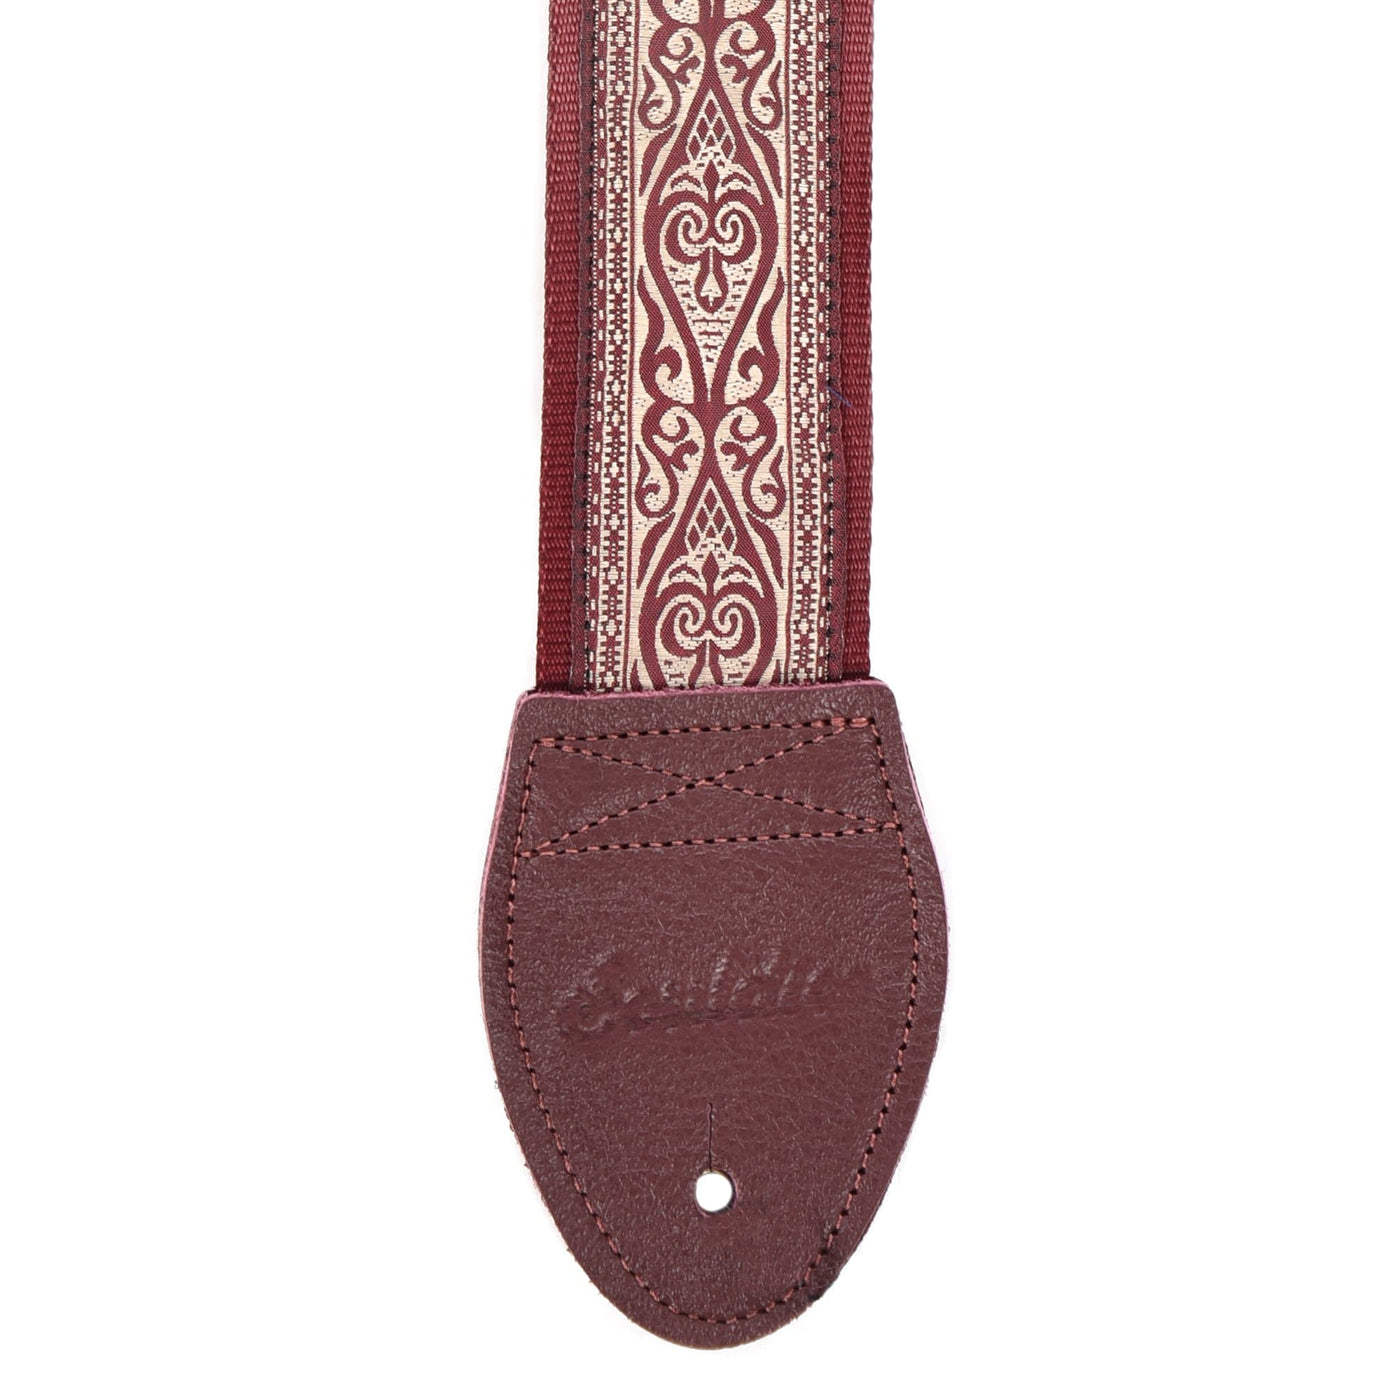 Souldier GS0871BD04BD - Handmade Seatbelt Guitar Strap for Bass, Electric or Acoustic Guitar, 2 Inches Wide and Adjustable Length from 30" to 63"  Made in the USA, Ellingon, Burgundy